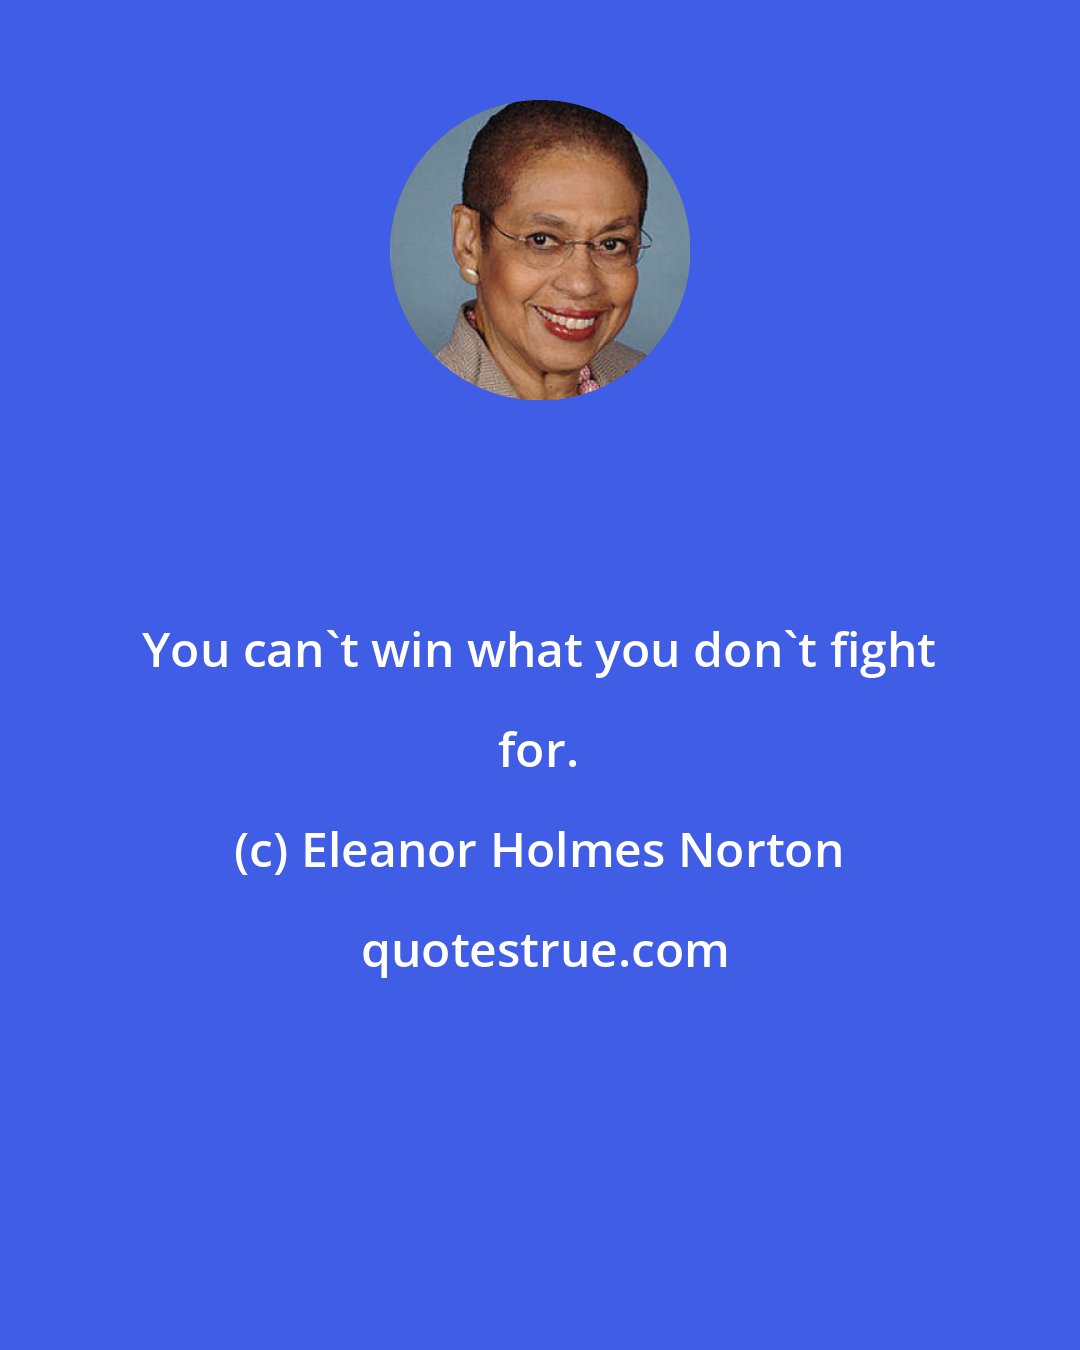 Eleanor Holmes Norton: You can't win what you don't fight for.